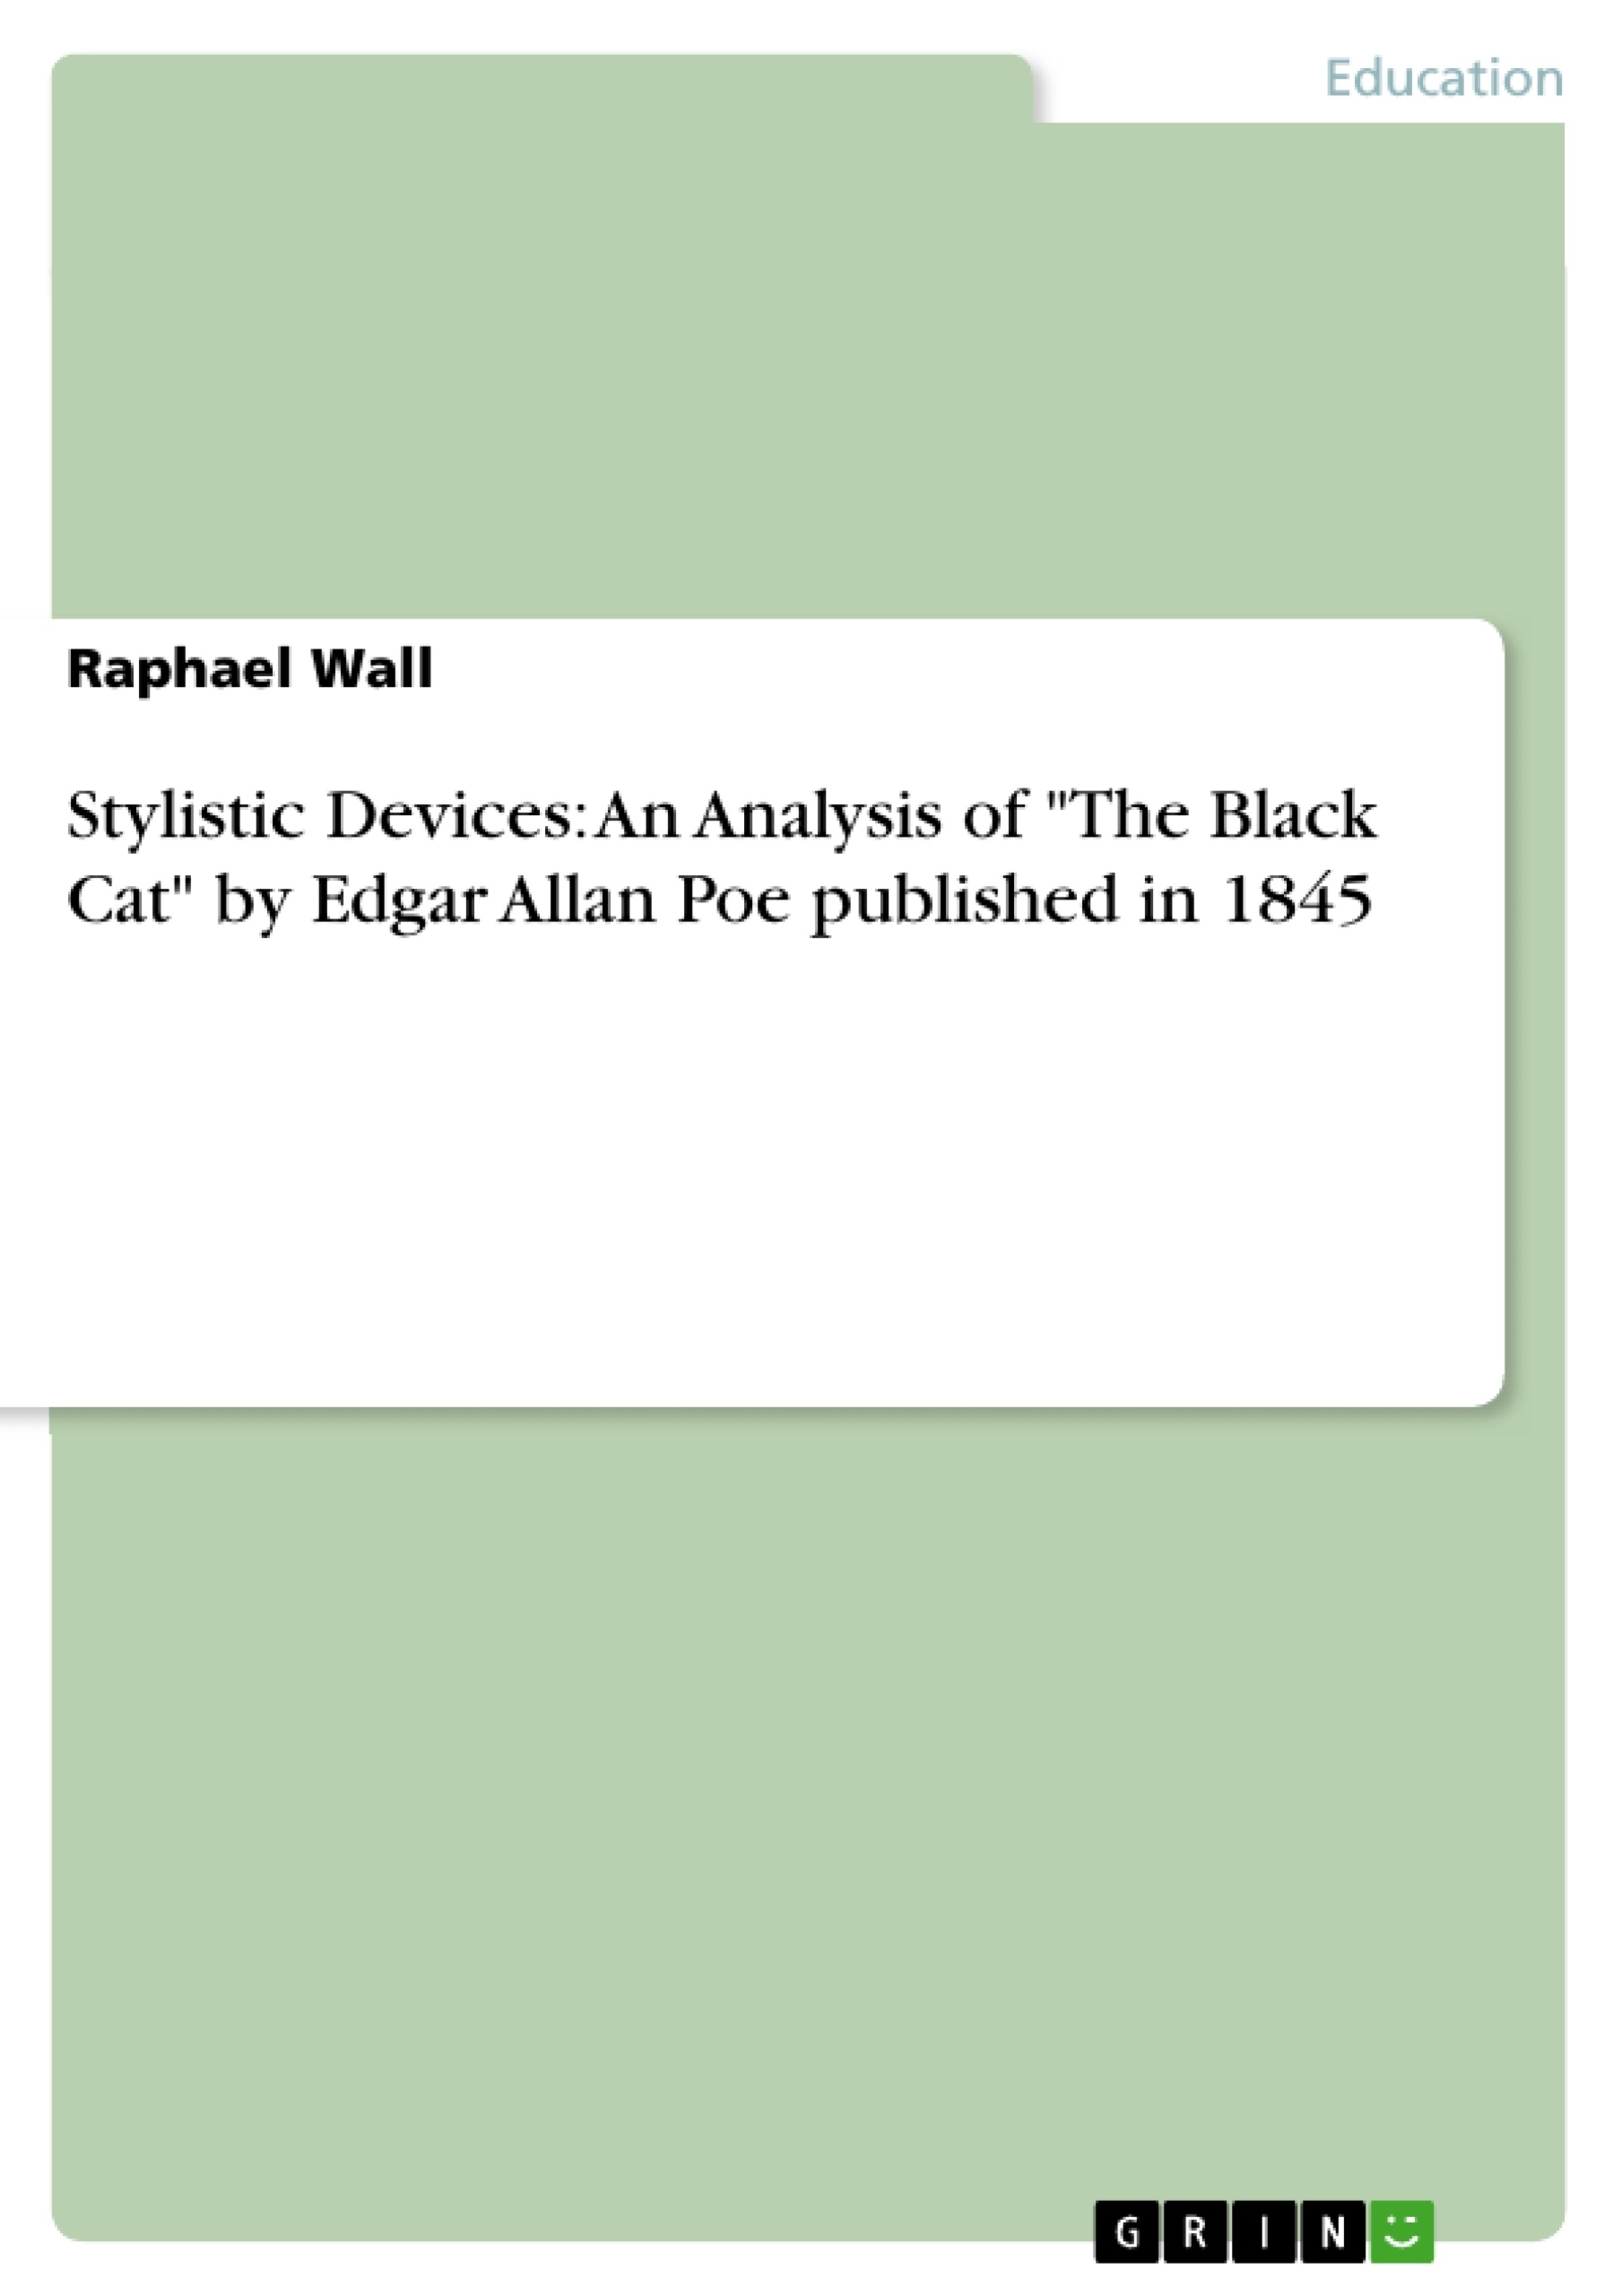 Título: Stylistic Devices: An Analysis of "The Black Cat" by Edgar Allan Poe published in 1845